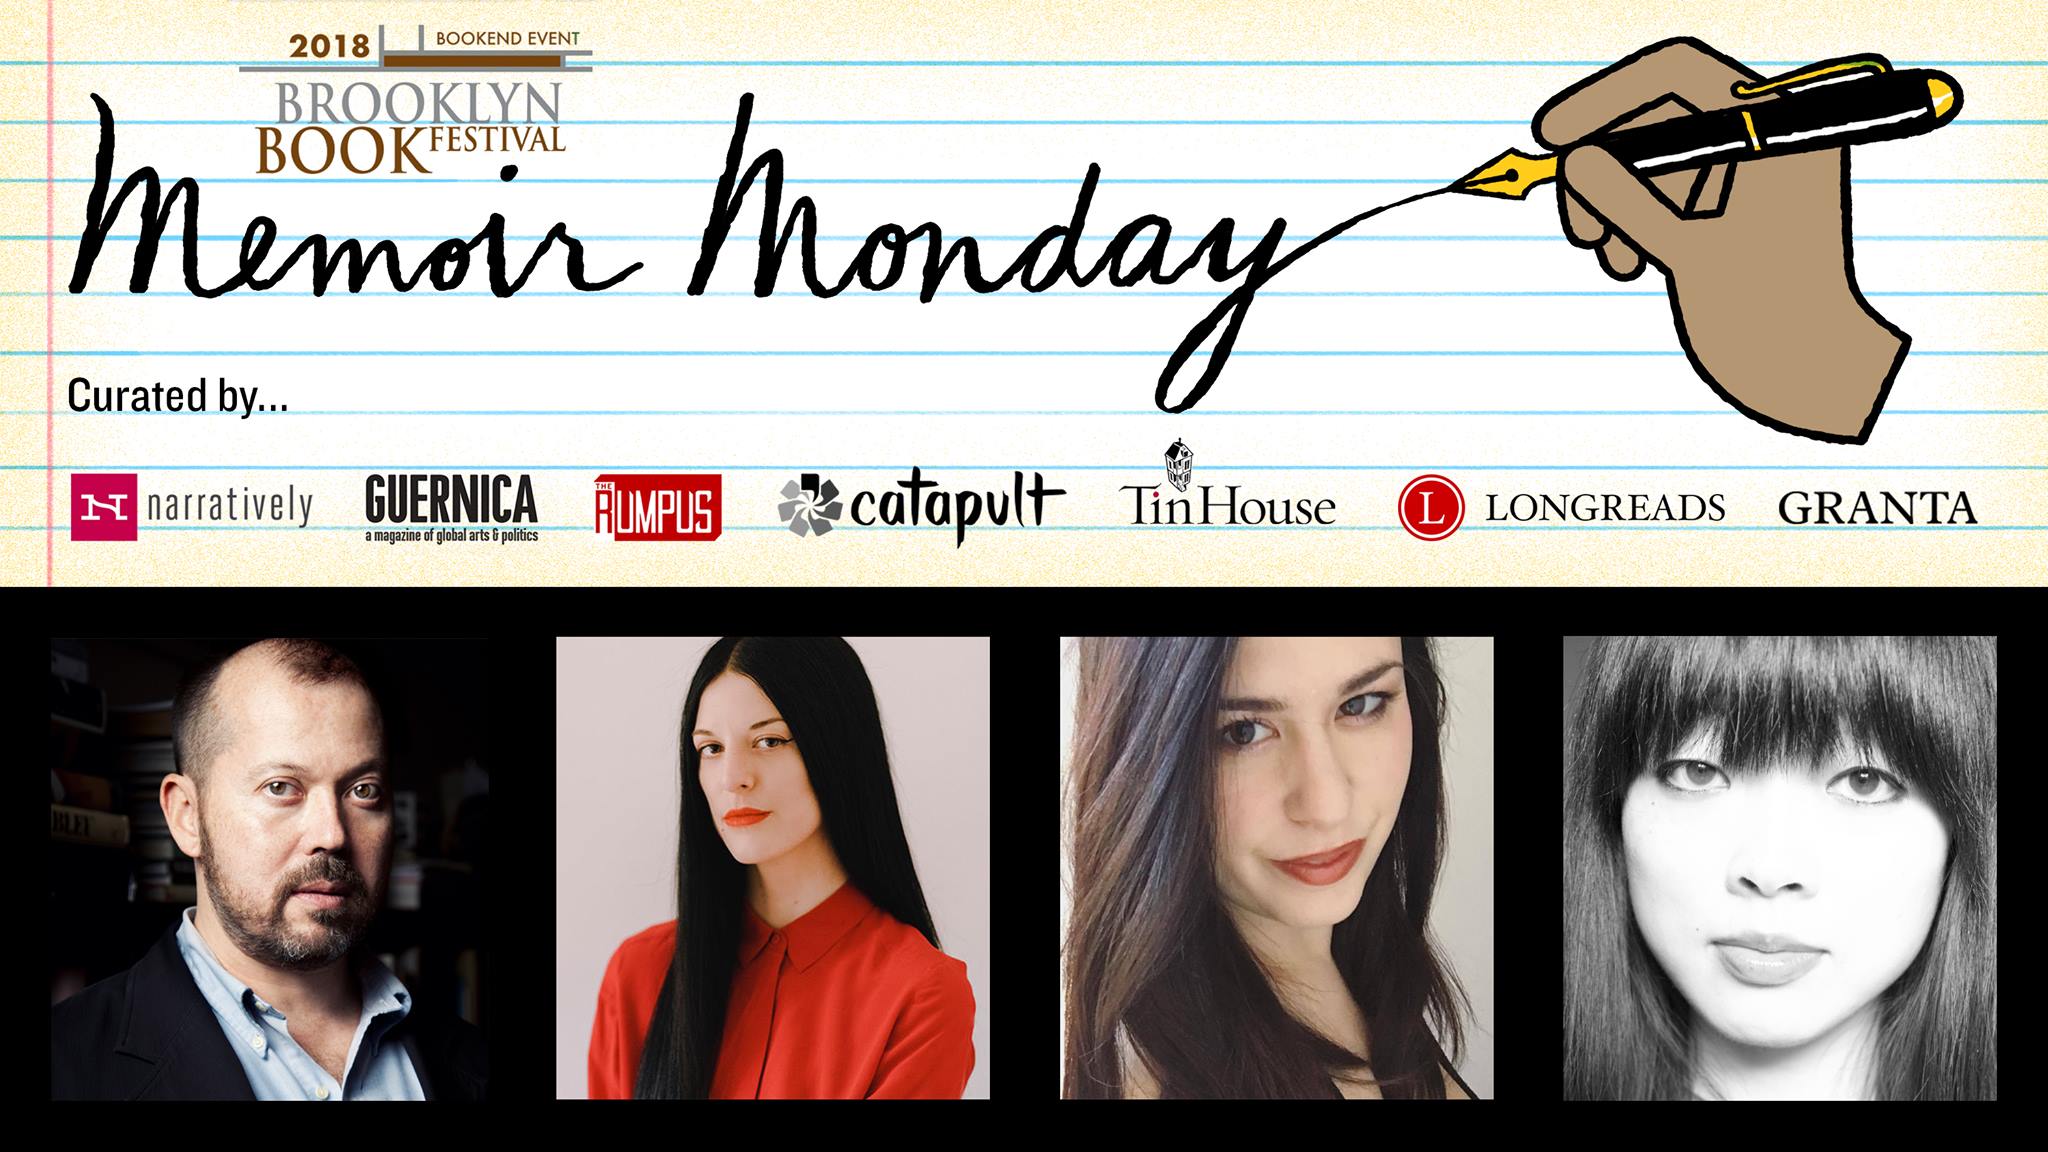 BROOKLYN BOOK FEST BOOKEND EVENT: Memoir Monday: Featuring Chelsea Hodson, Tracy O'Neill, & Lisa Marie Basile — Hosted by Lilly Dancyger